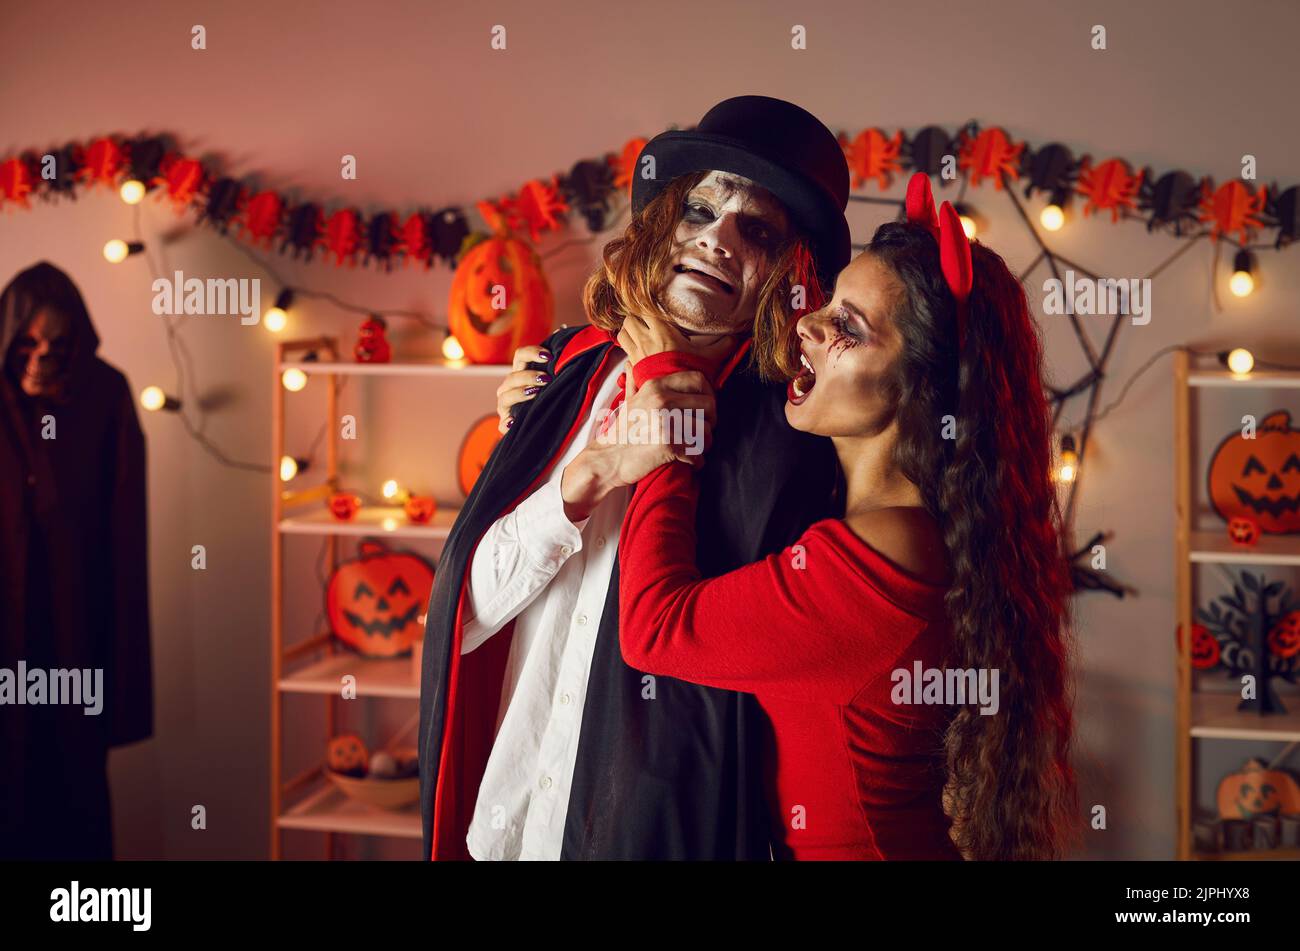 Devil woman having fun and jokingly choking scared vampire at spooky Halloween party Stock Photo